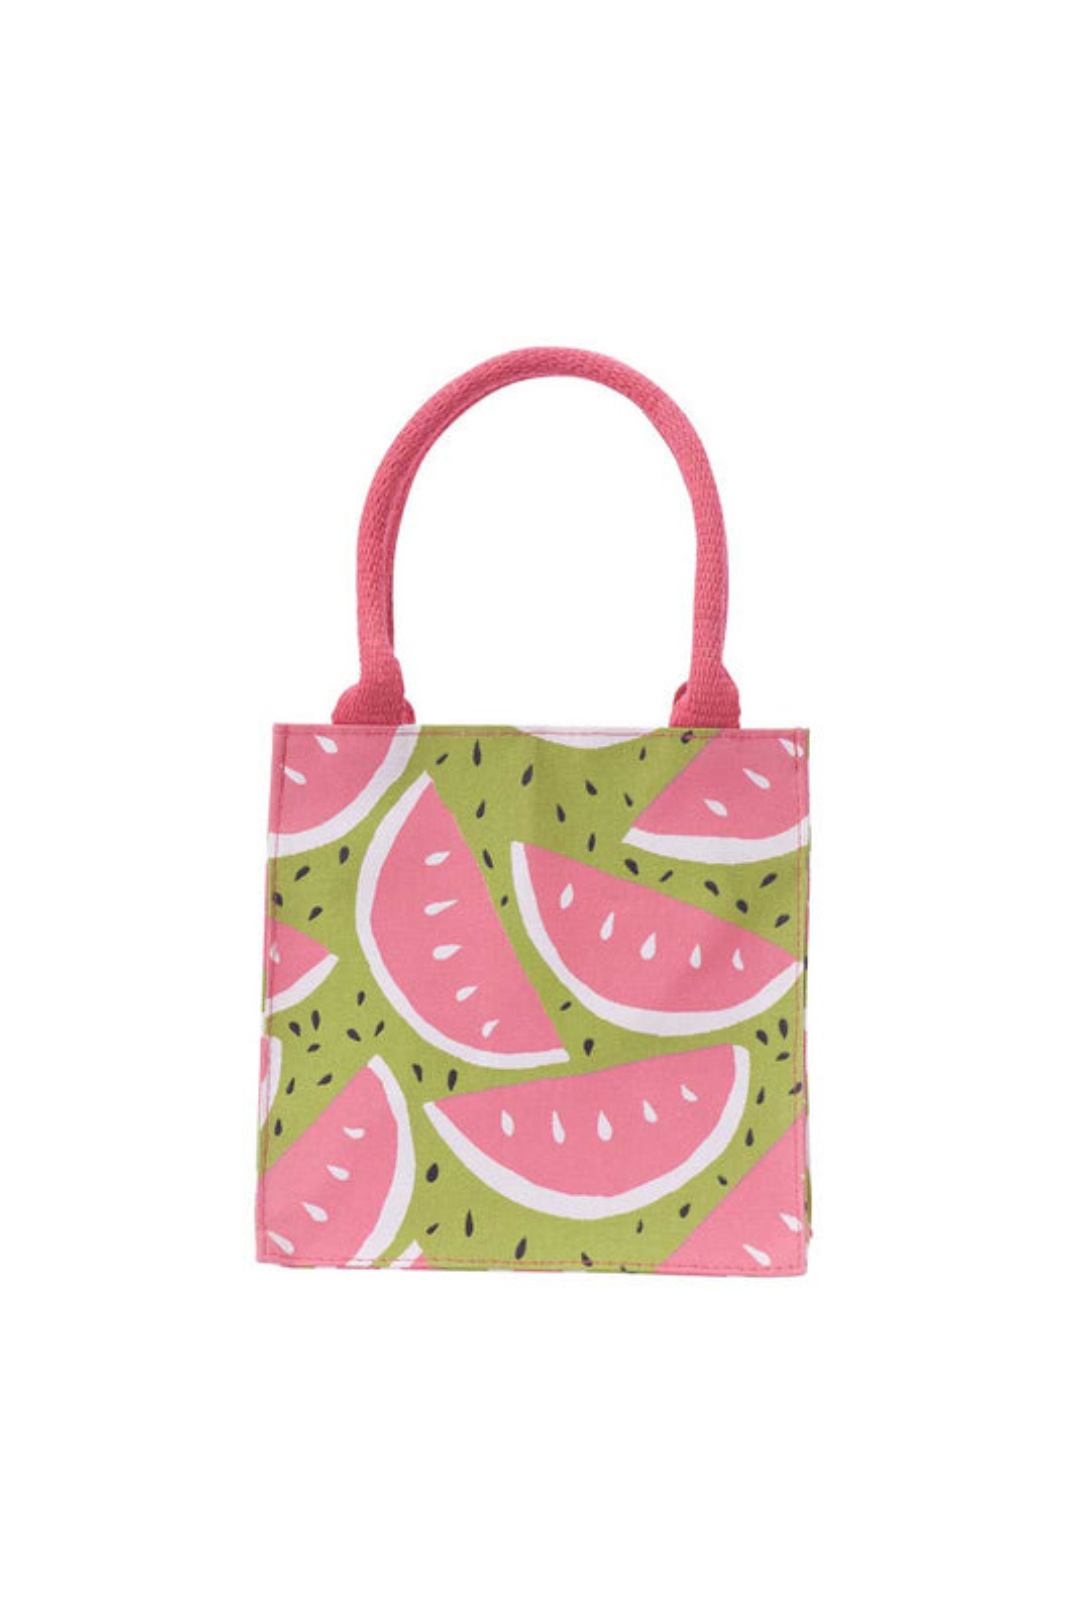 Watermelon Party Itsy Bitsy Reusable Gift Bag Tote